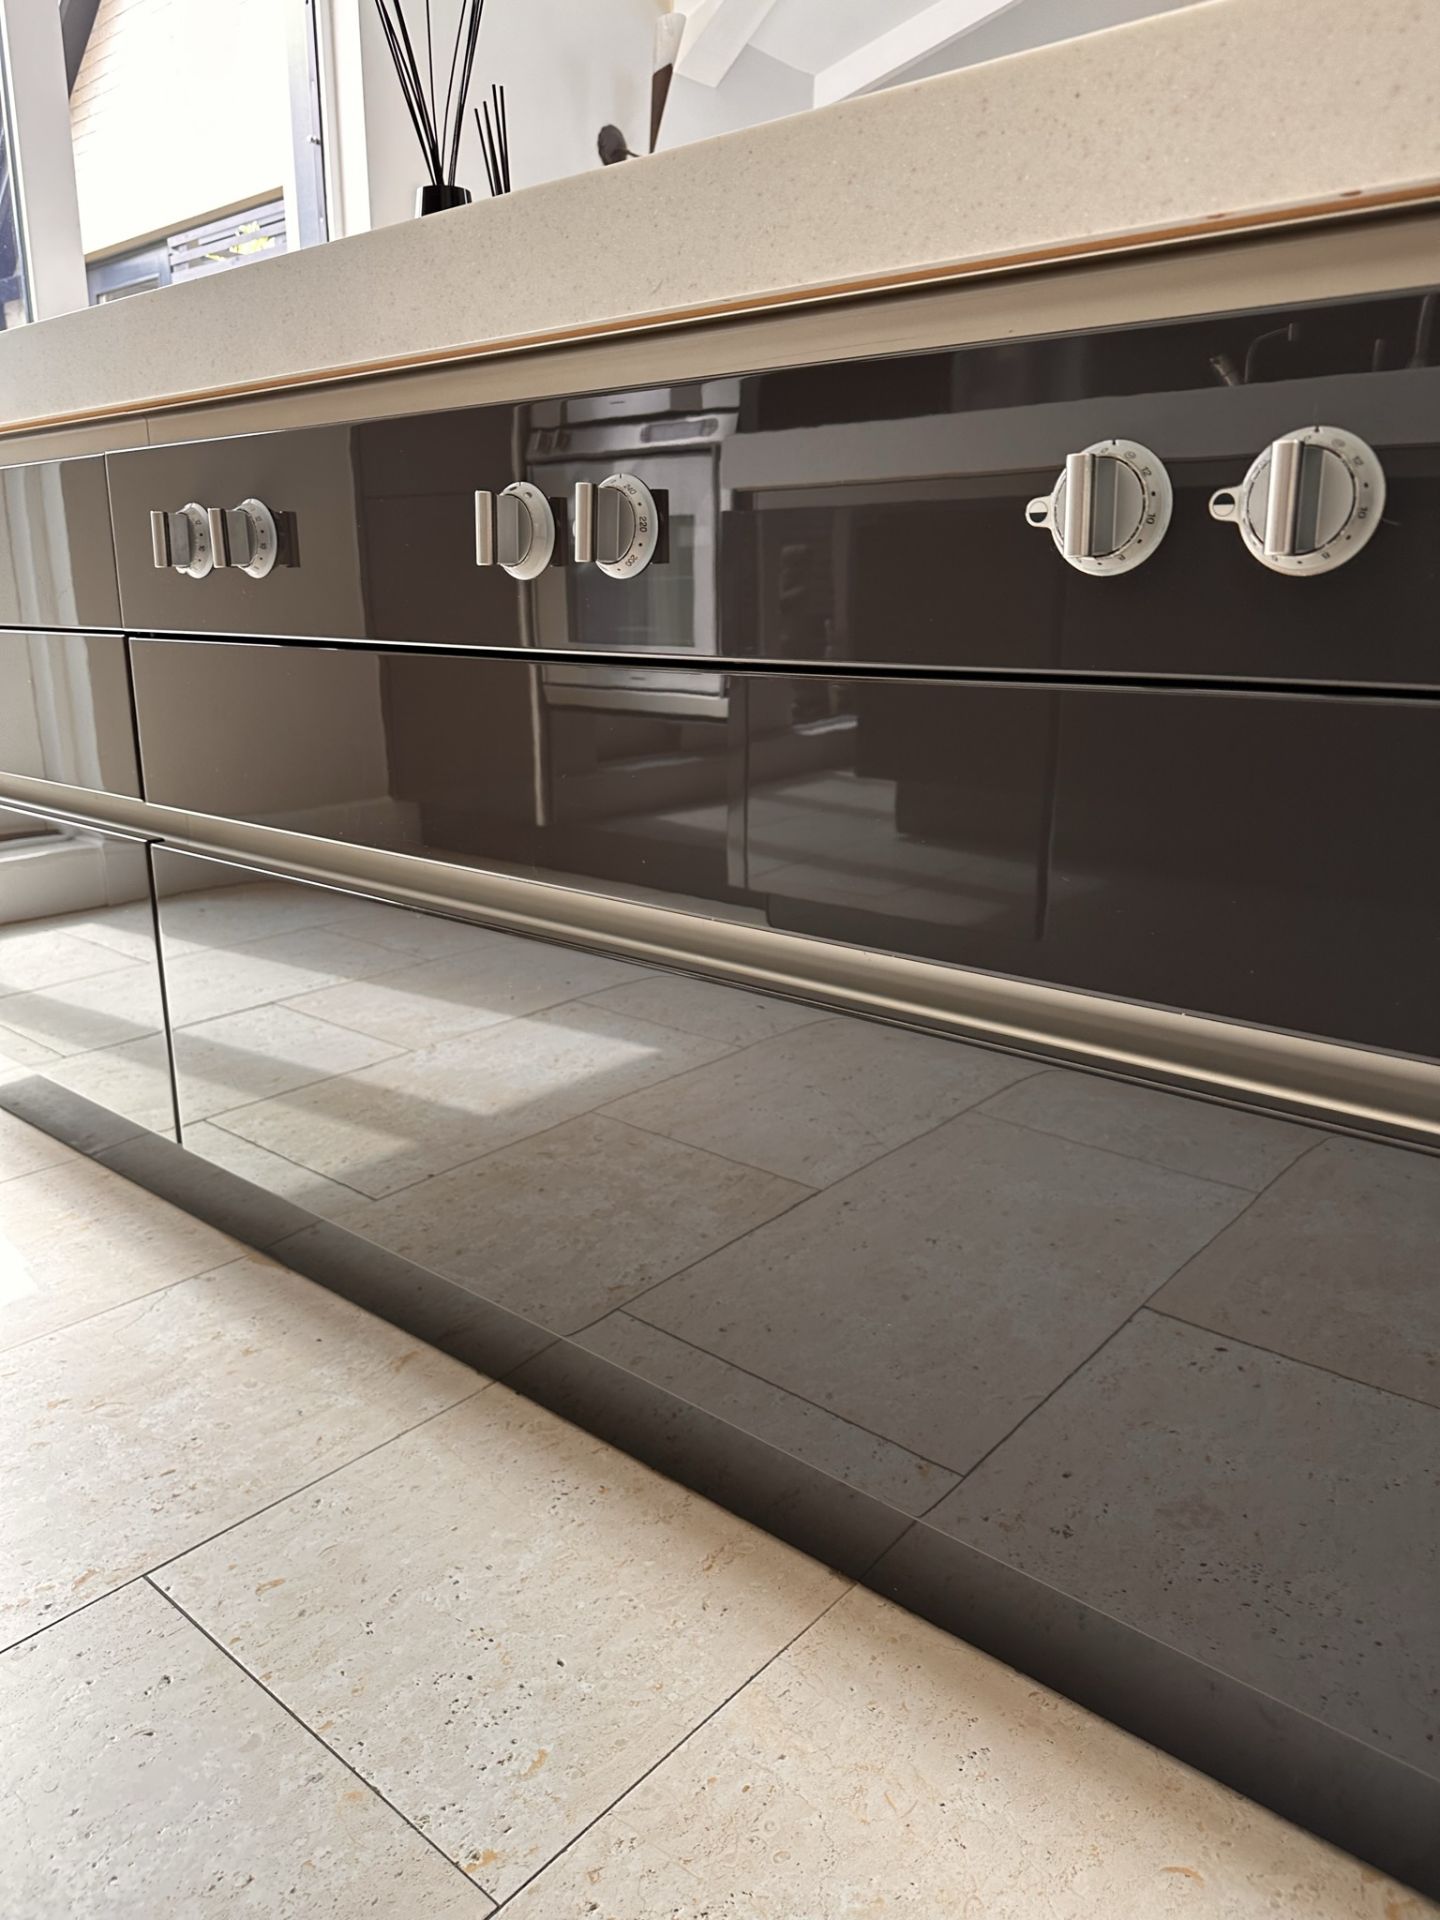 1 x Stunning Bespoke Siematic Gloss Fitted Kitchen With Corian Worktops - In Excellent Condition - - Image 80 of 94